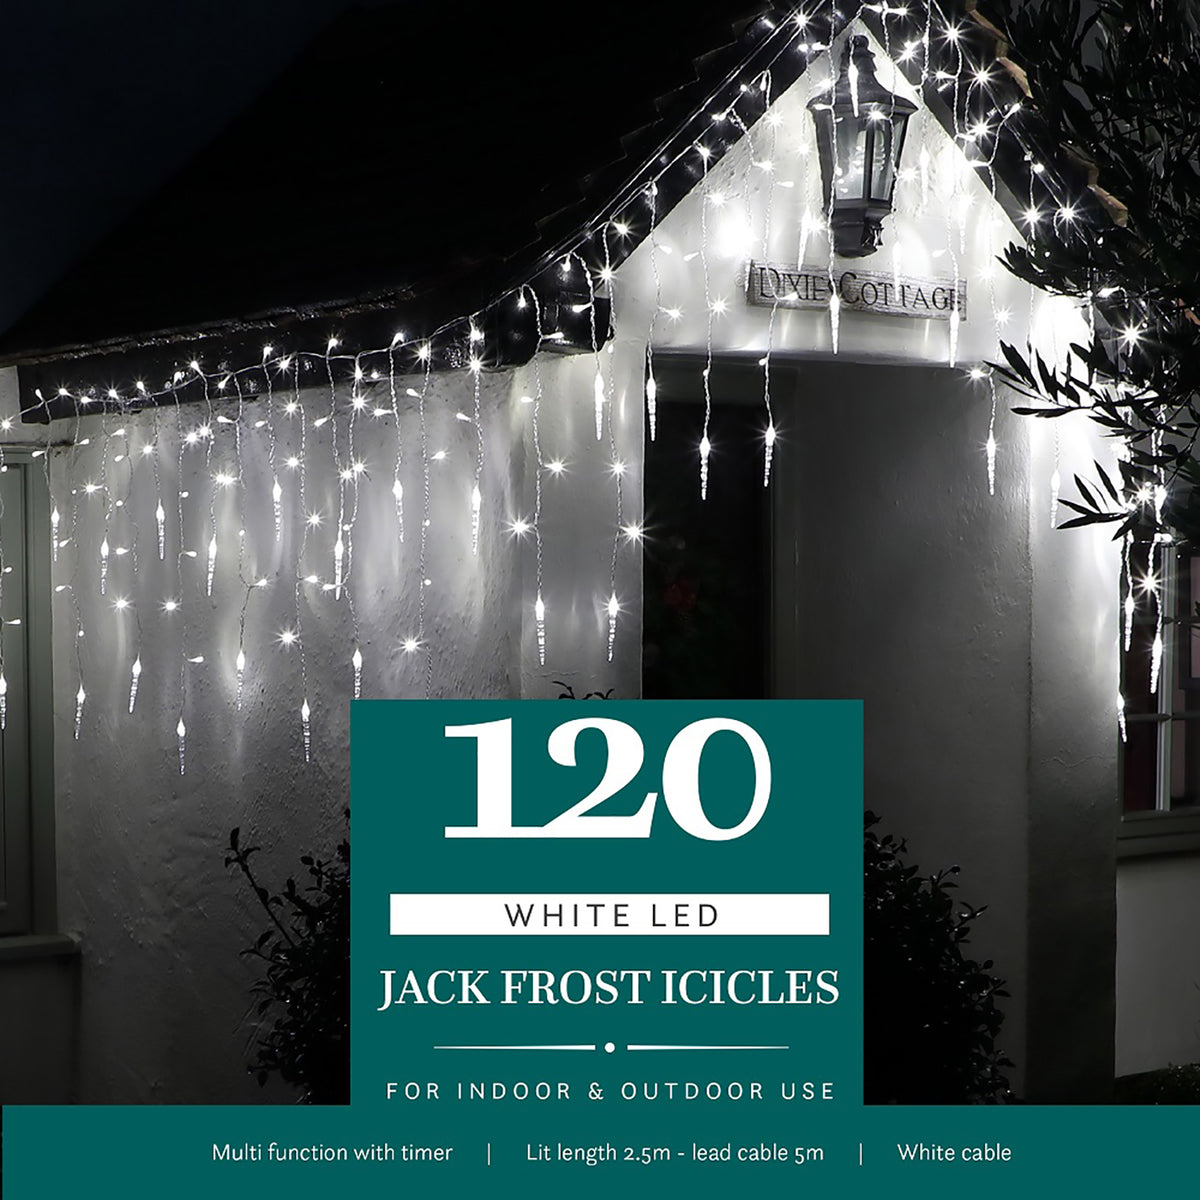 Noma Christmas White Multifunction Jack Frost Icicles With Clear Cable 120, 360, 720